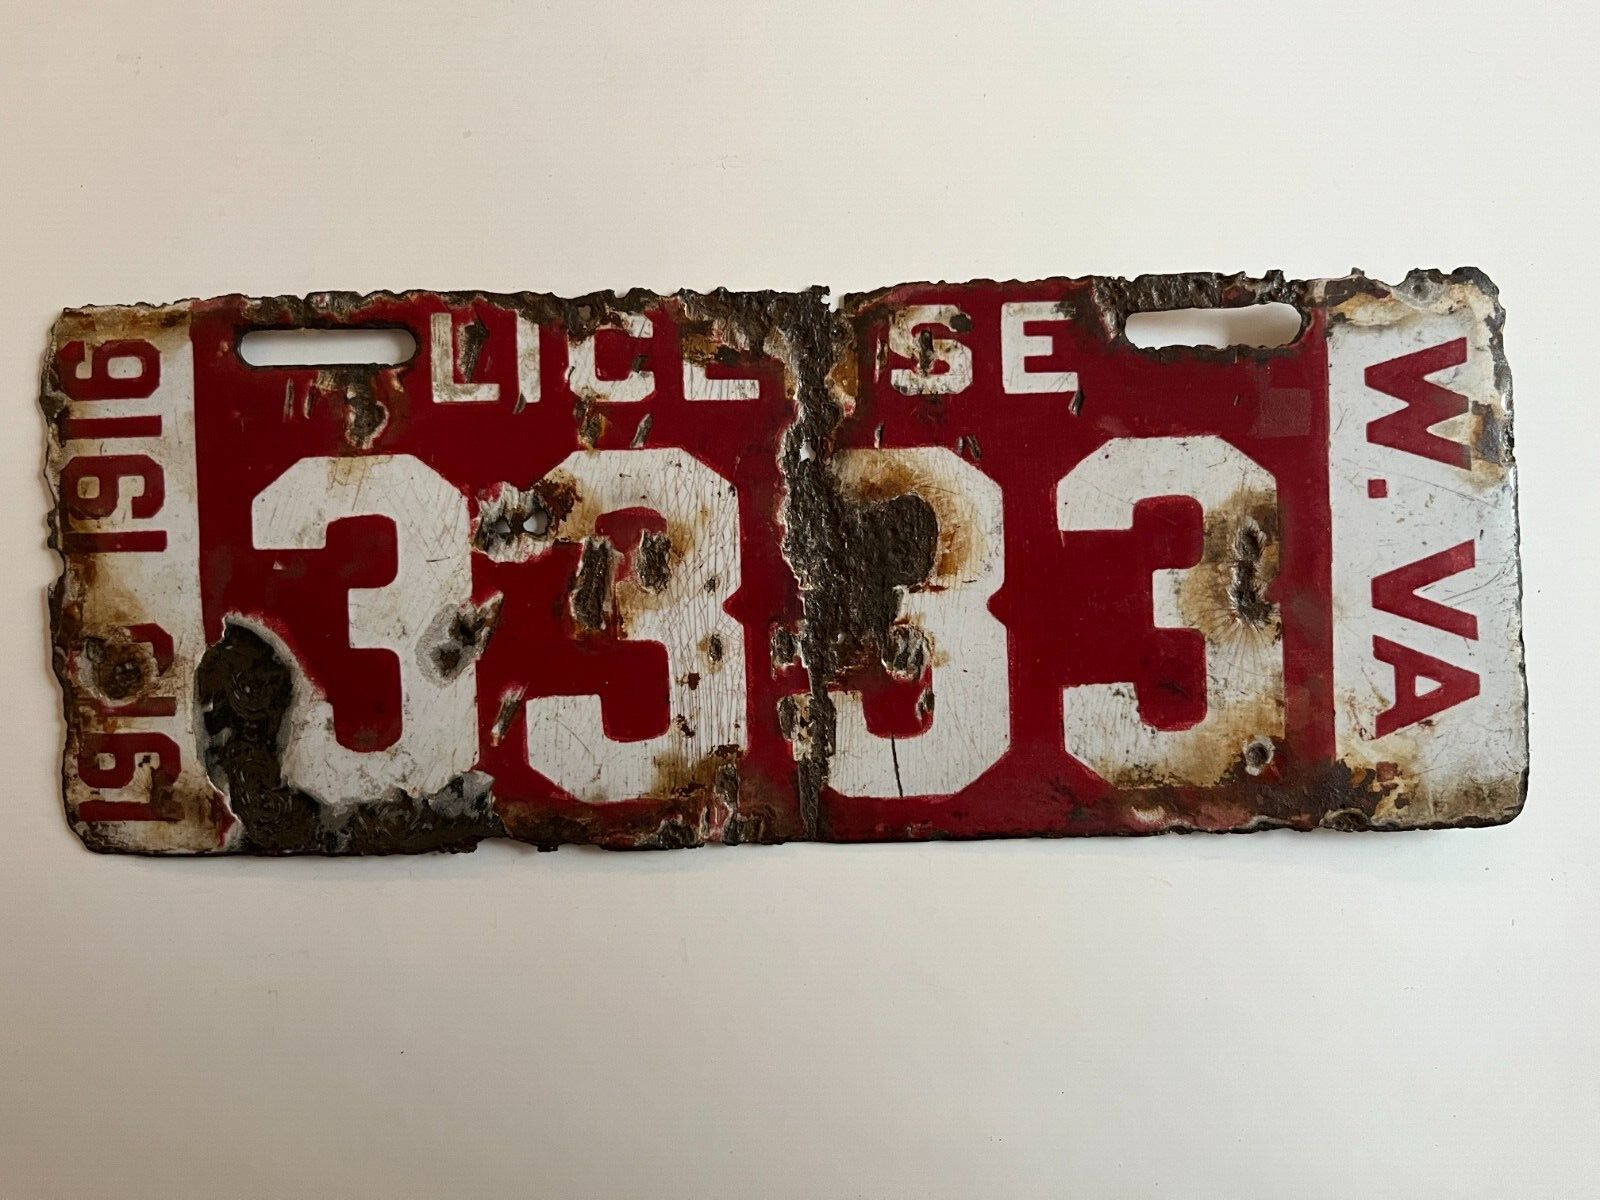 1915 1916 West Virginia Porcelain License Plate Repeating Number #3333 Amazing